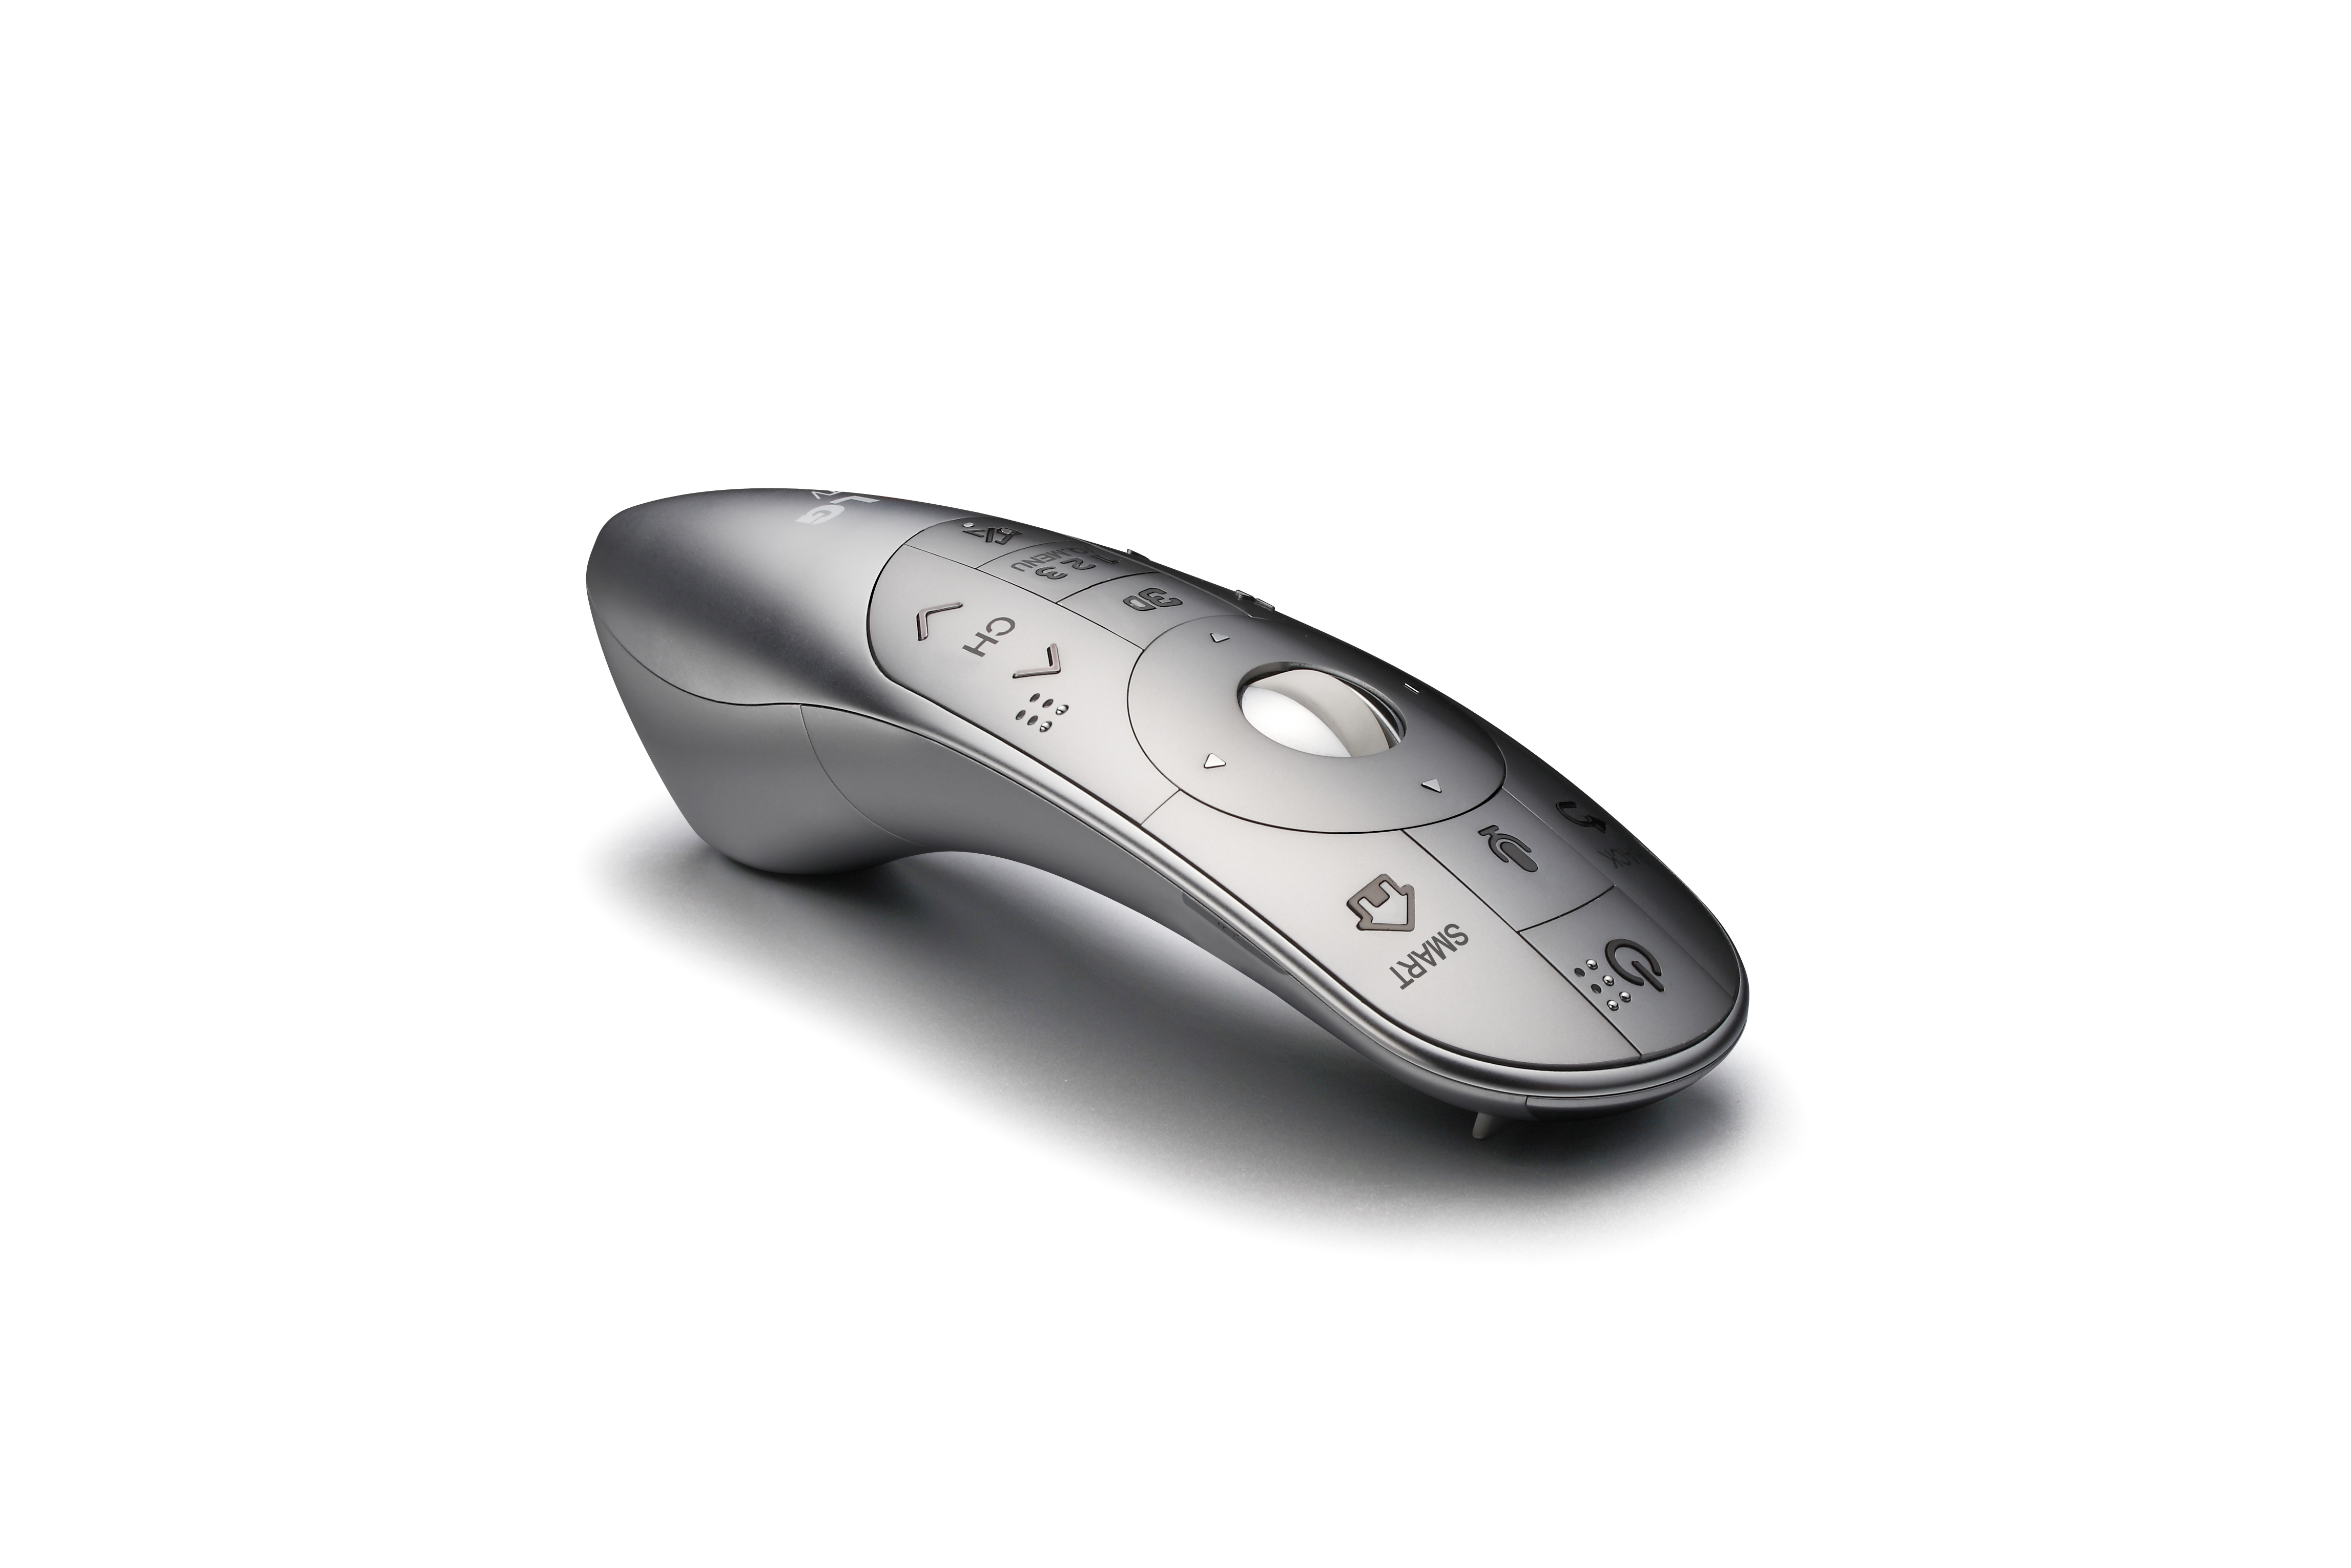 LG’s all-new Magic Remote for its CINEMA 3D Smart TV lineup on the floor